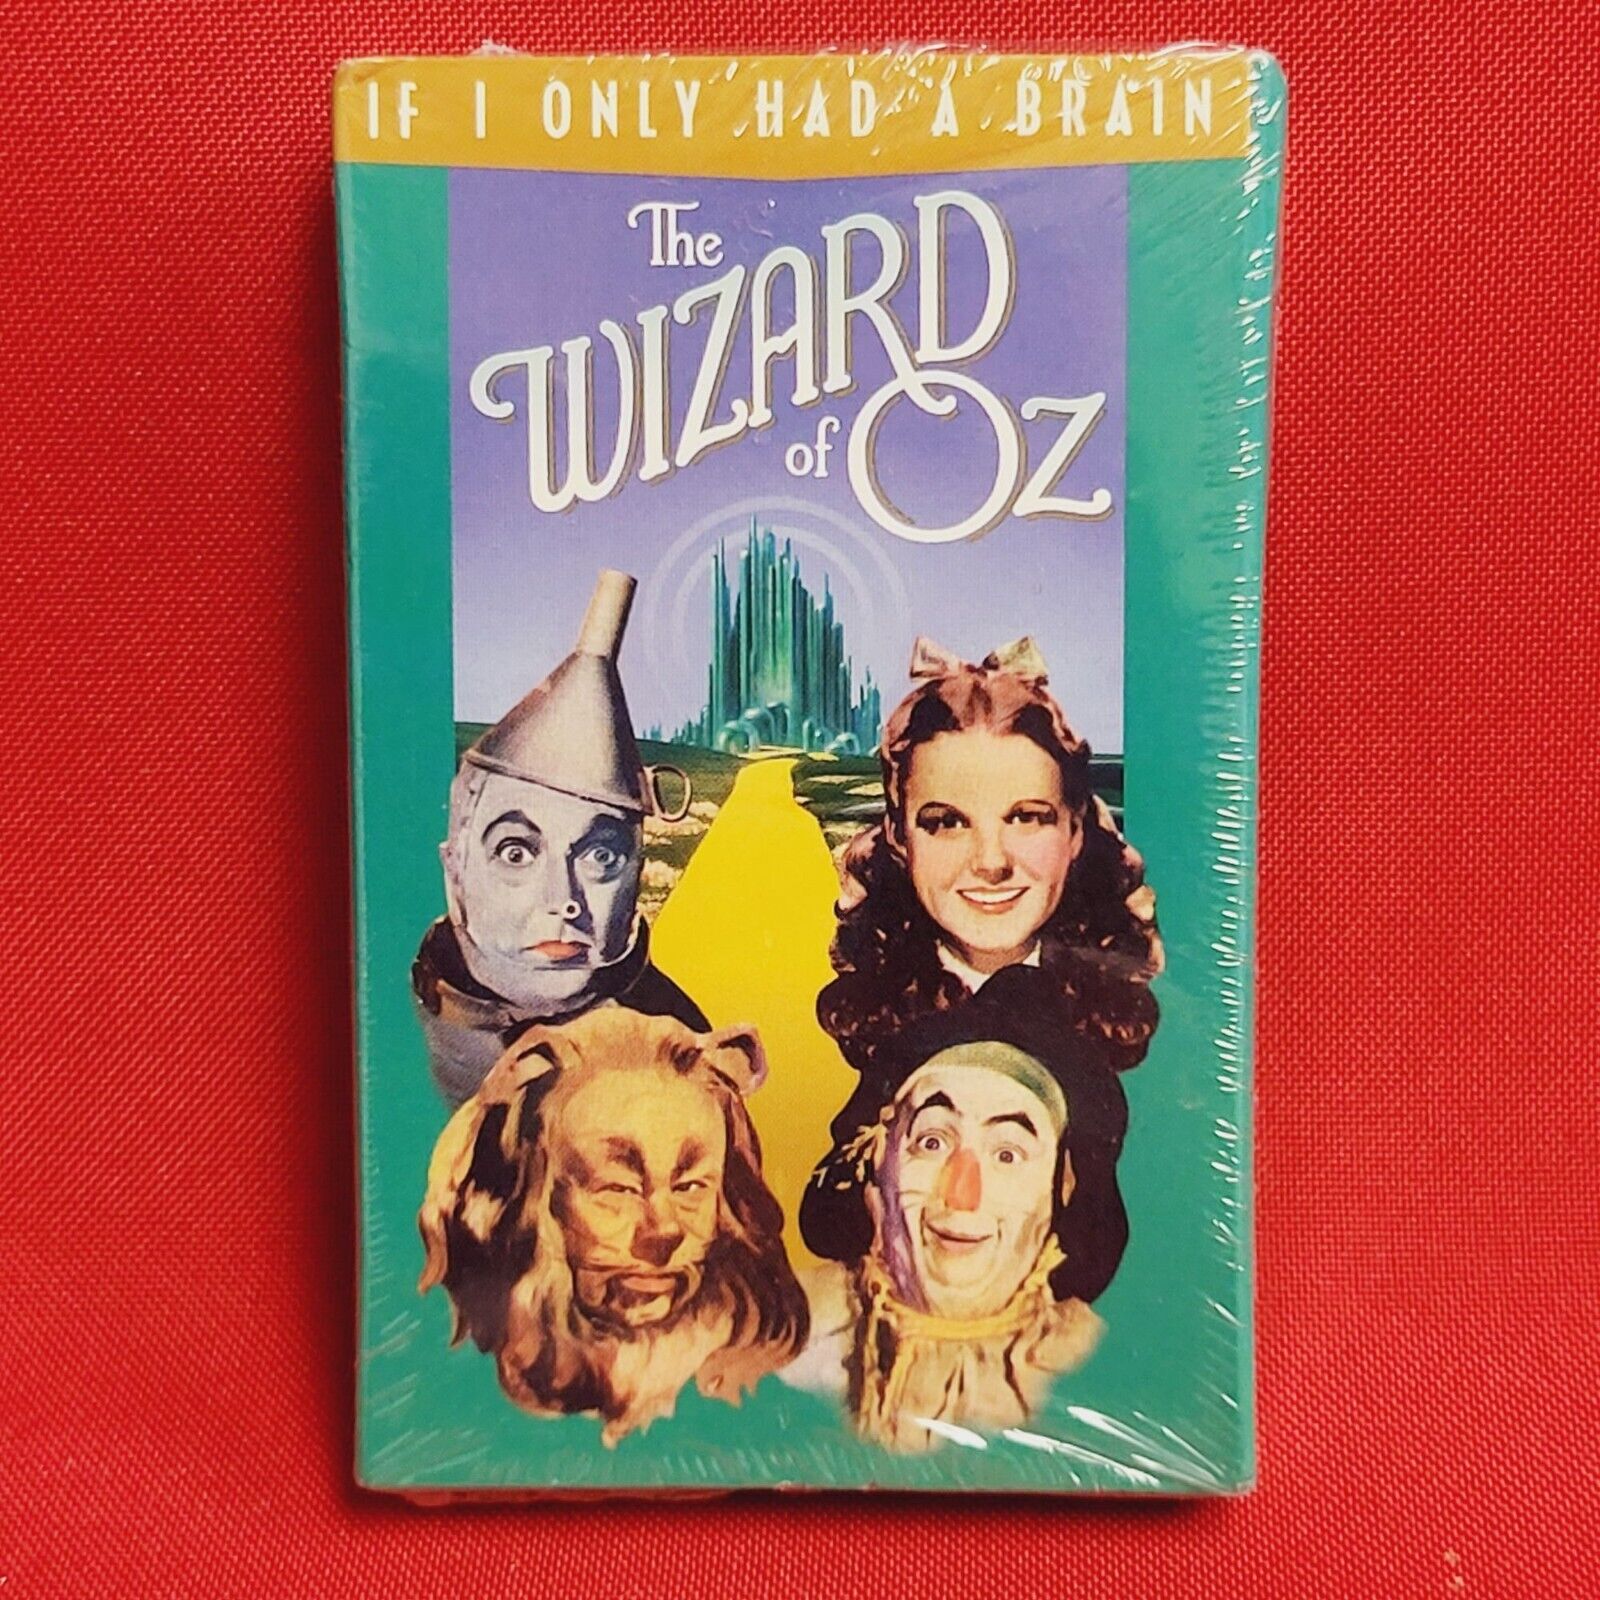 VTG The Wizard of Oz If I Only Had A Brain Audio Cassette New Sealed 1998